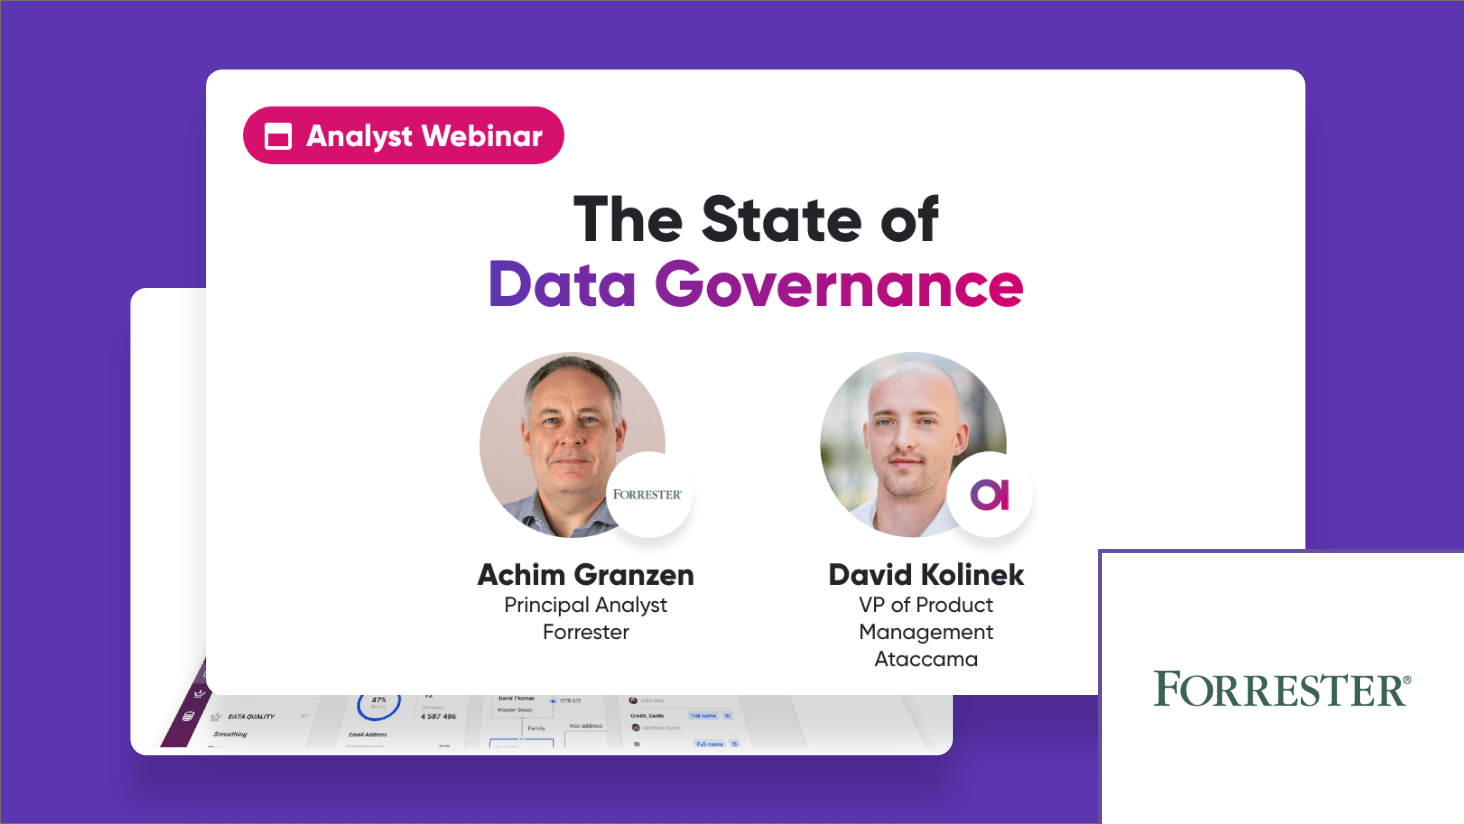 The State of Data Governance